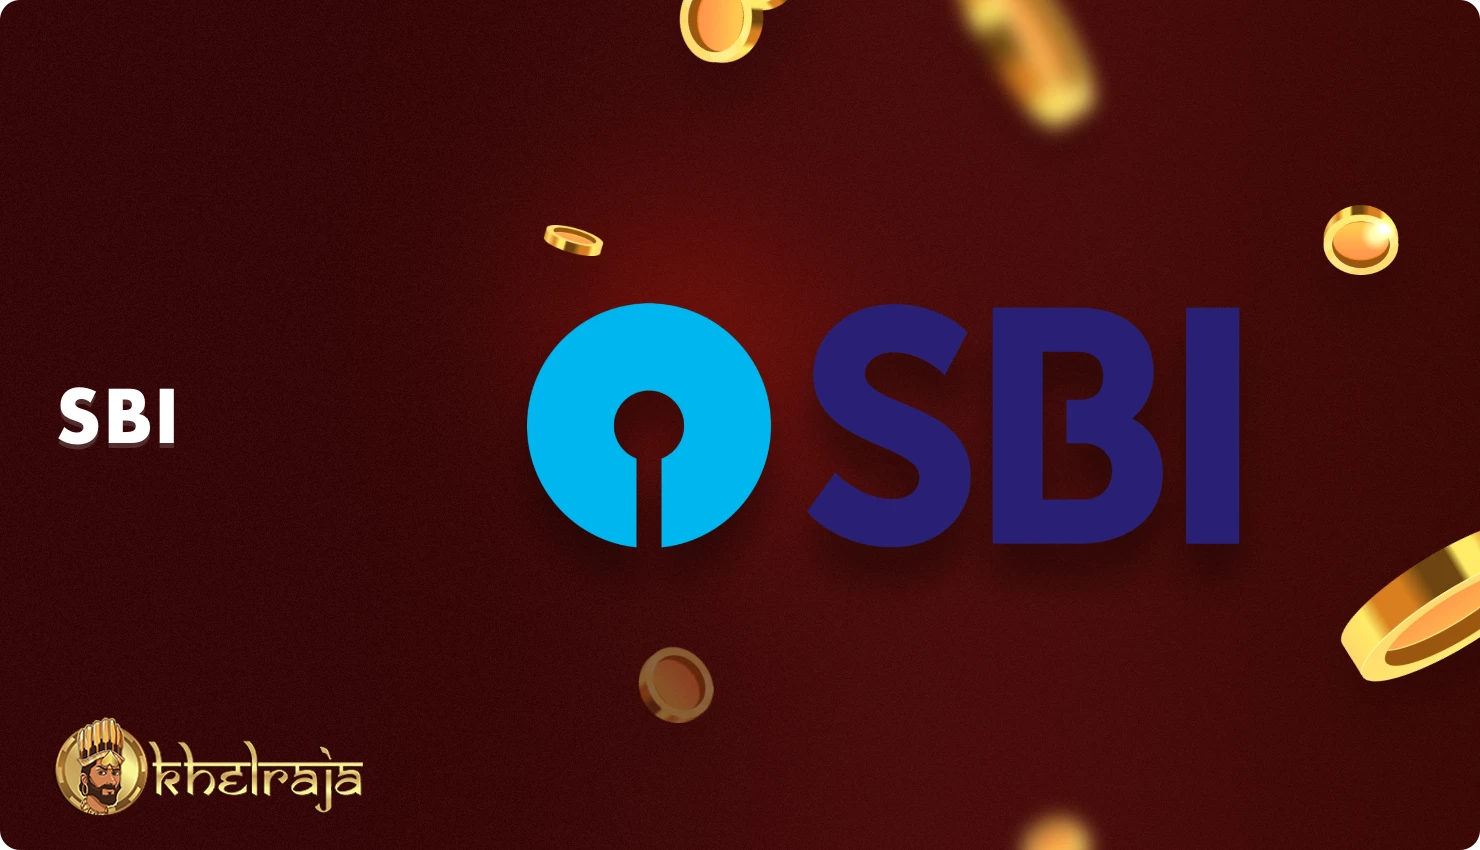 Khelraja users from India can use SBI for payment transactions on the platform